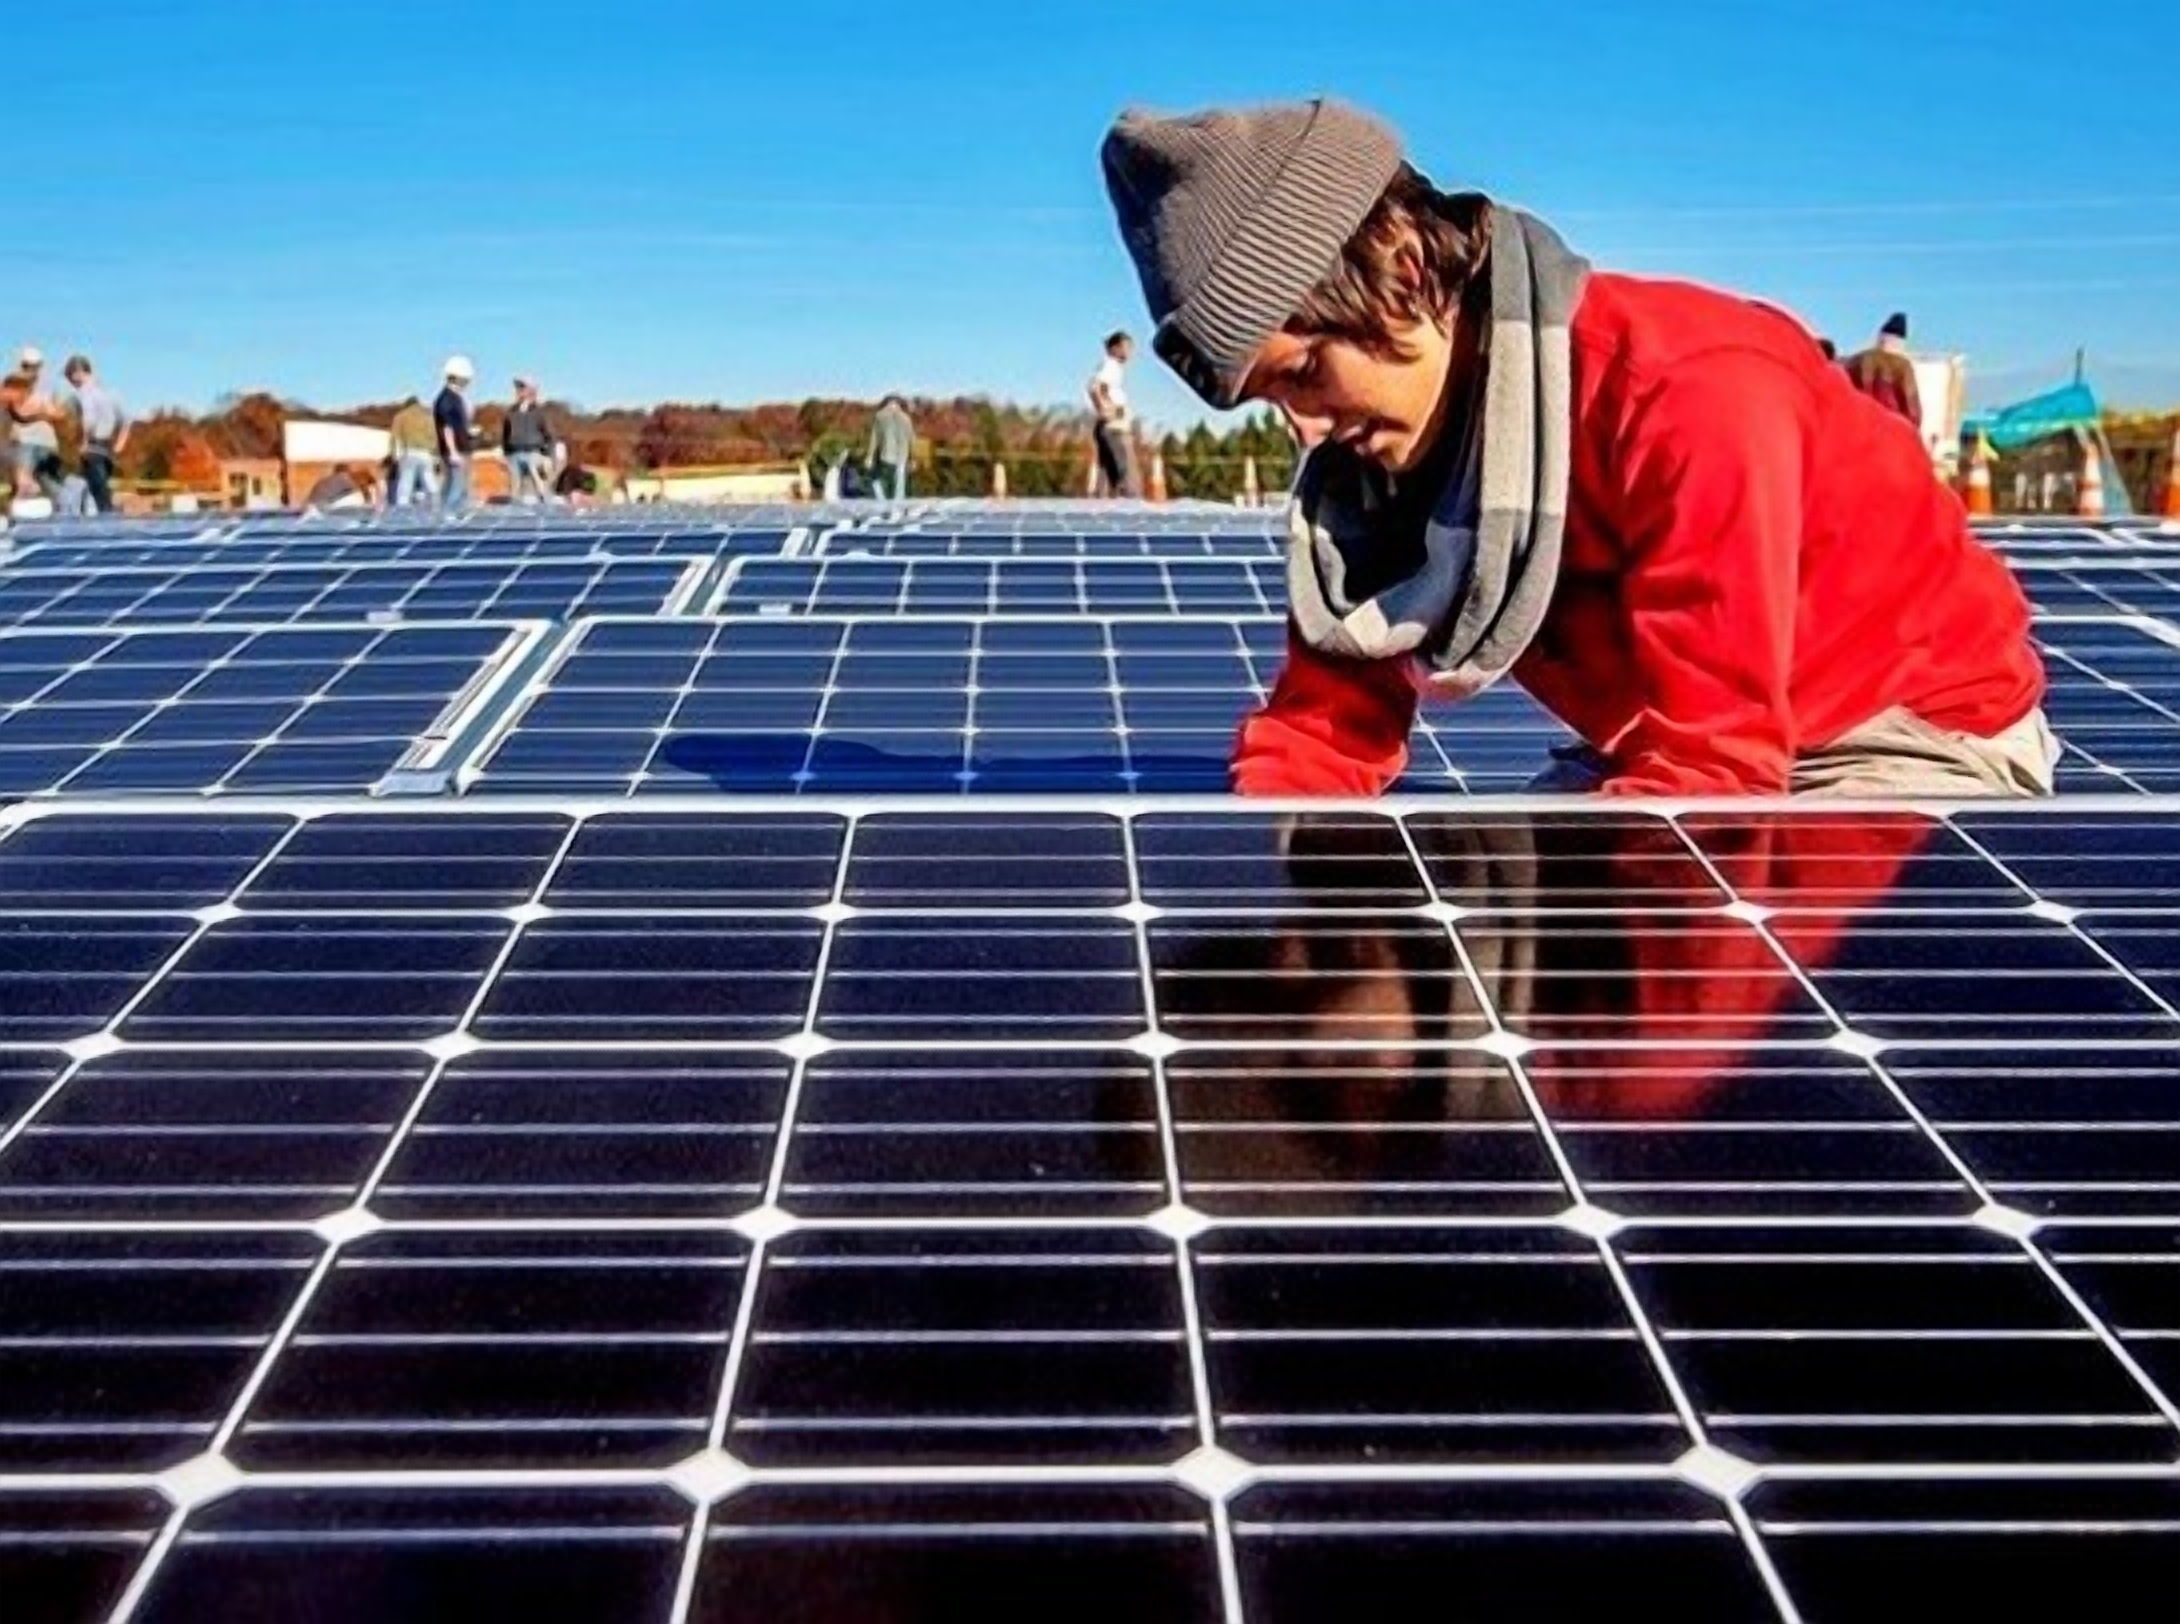 Intuit Launches Fund to Back Solar Power and Education